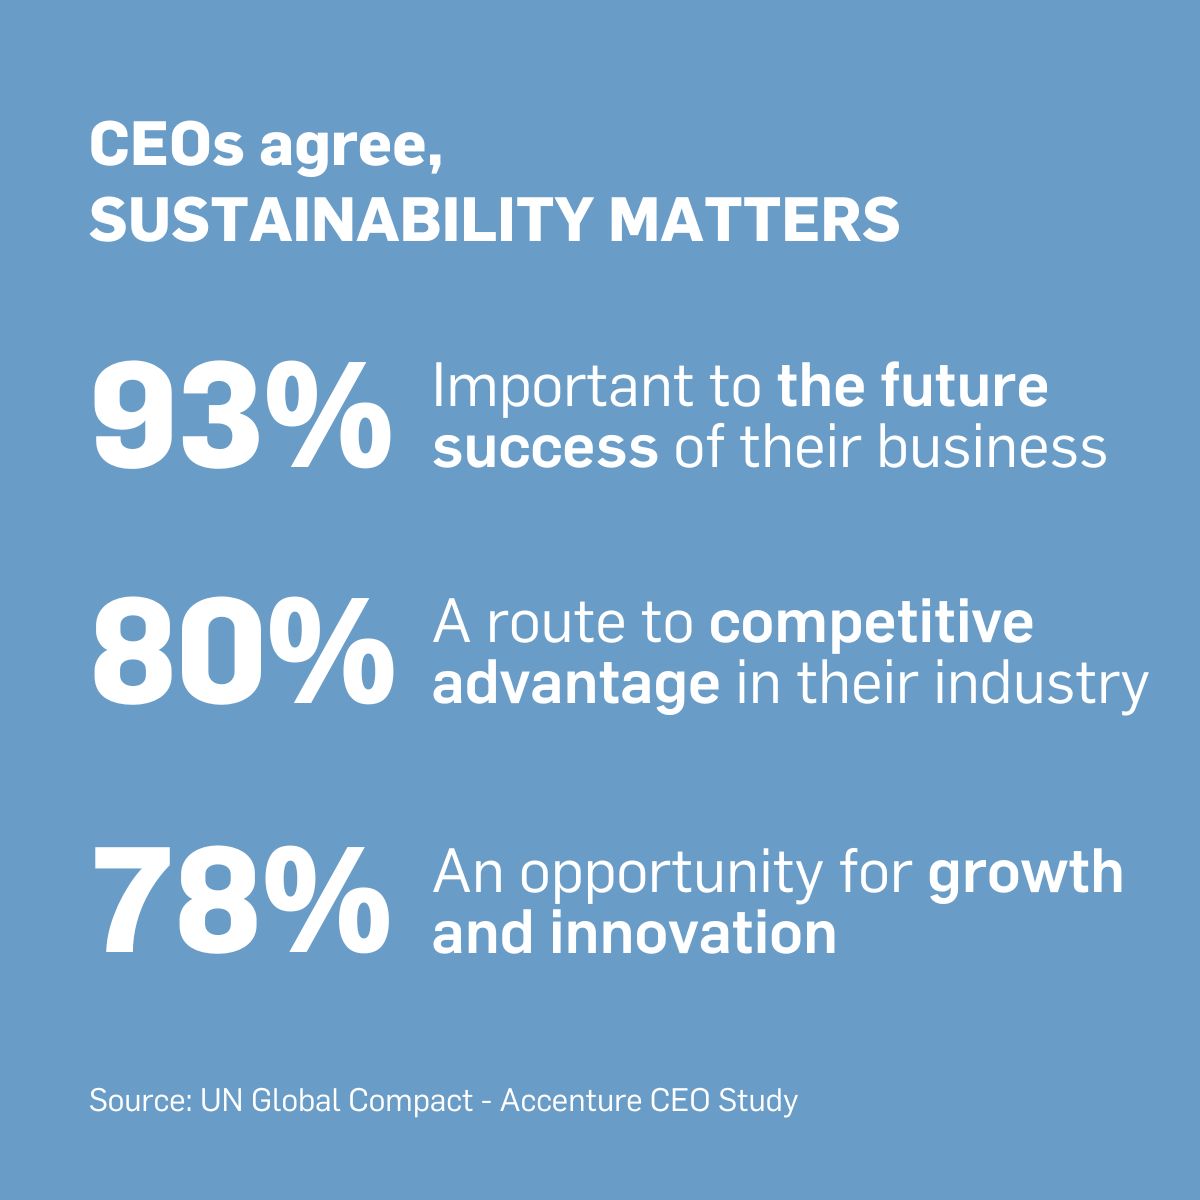 CEOs agree sustainability matters